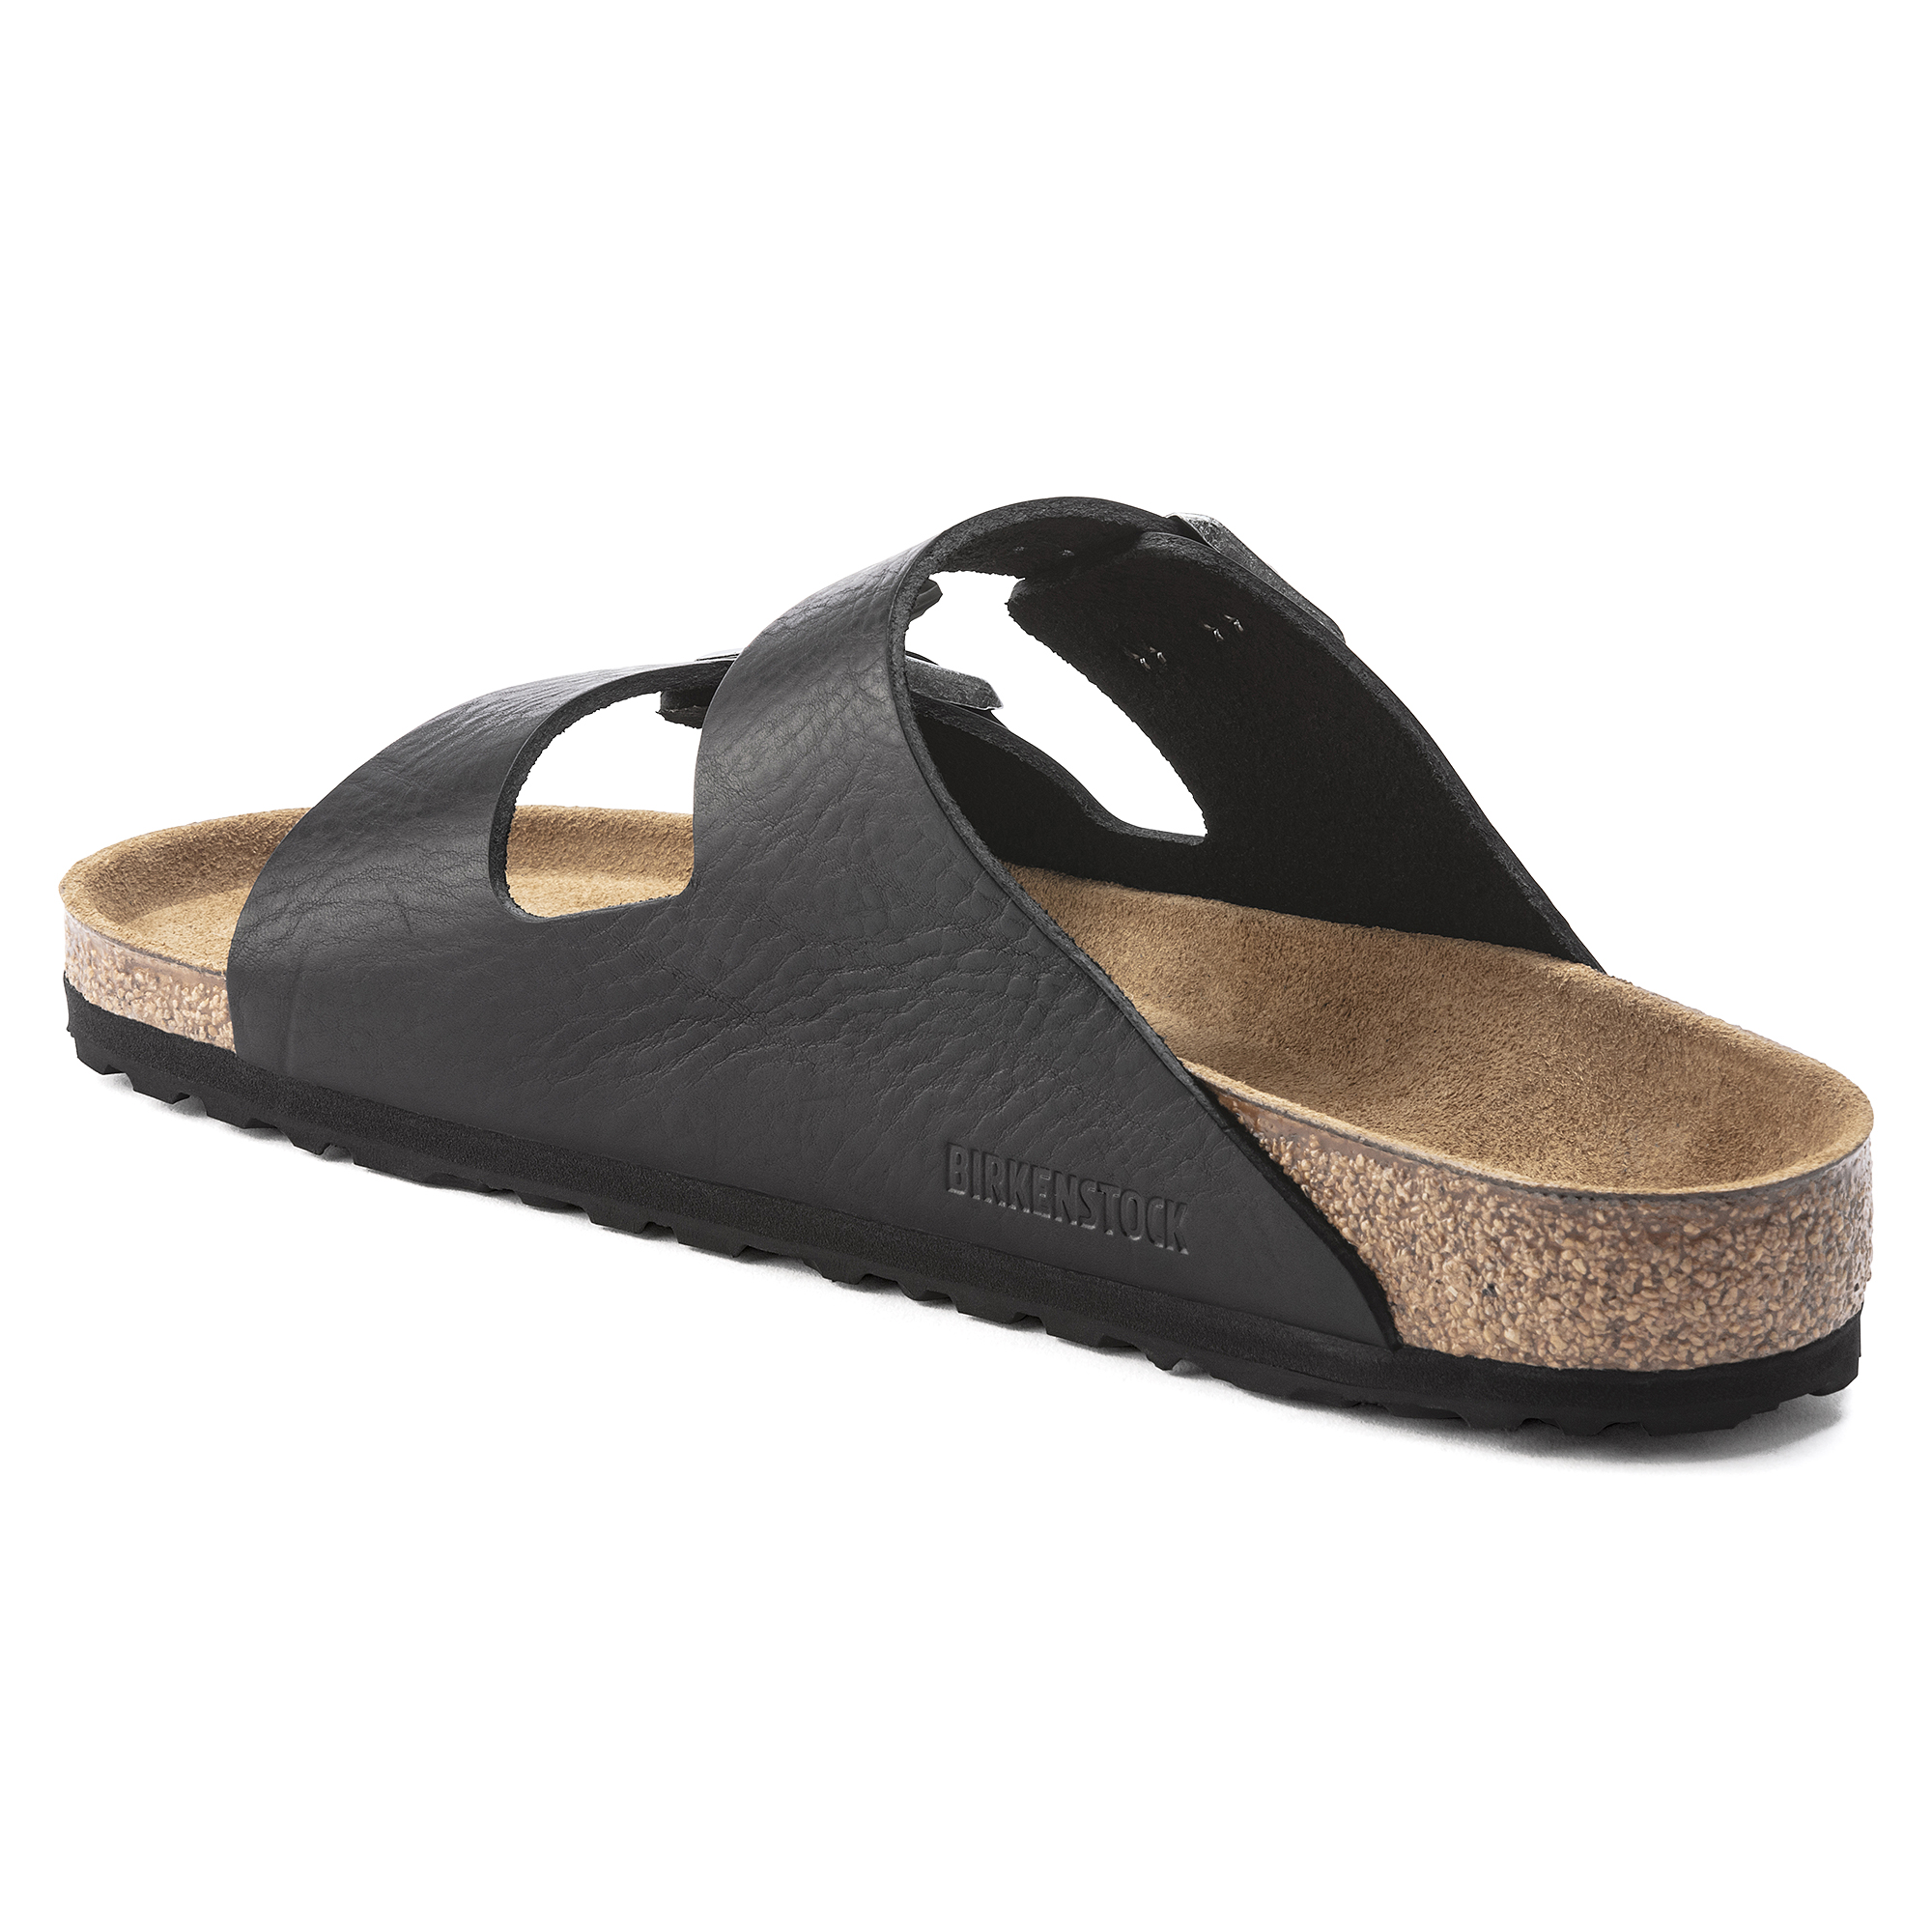 Women's Natural Flat Heel Sandals | Sliders & Footbed | Next Official Site